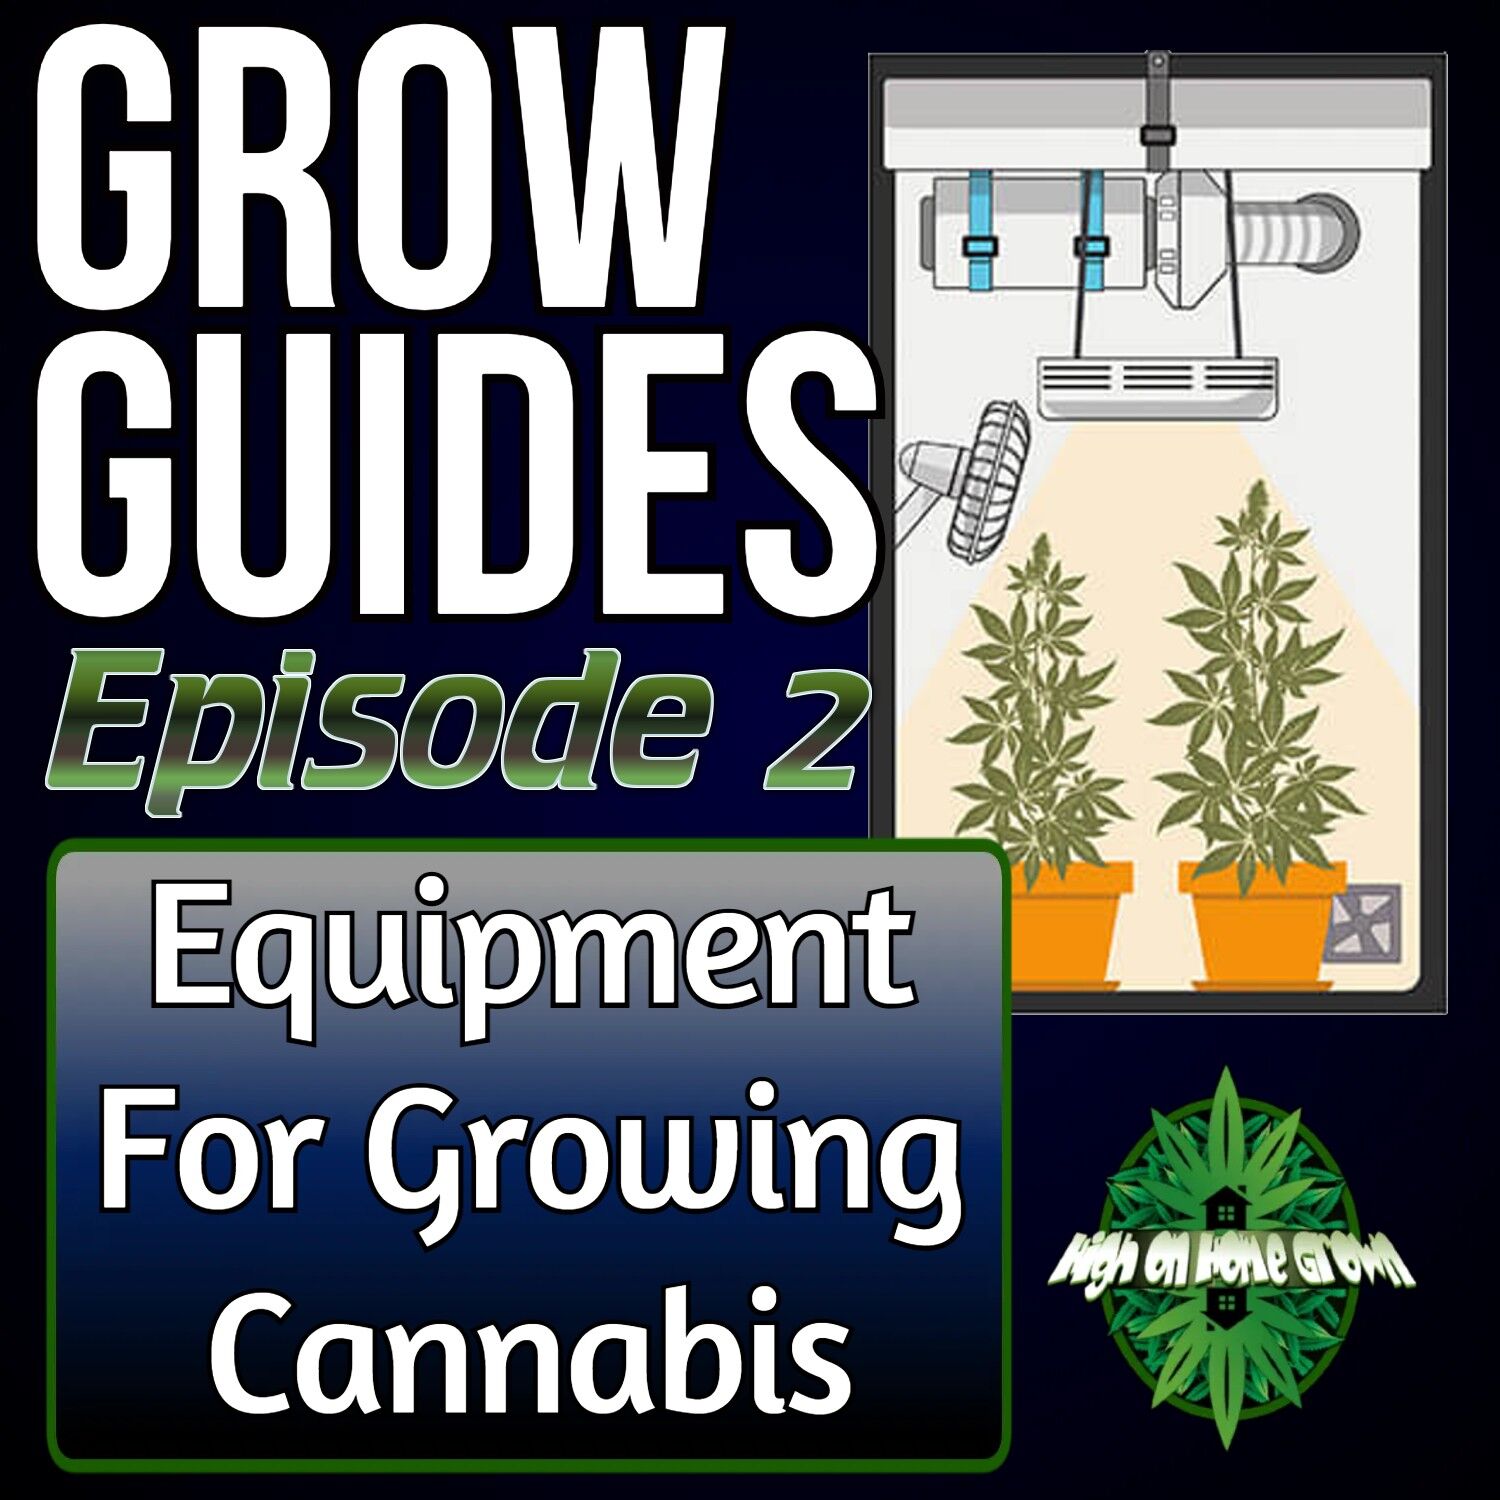 Equipment You Need to Grow Cannabis, cannabis grow guides, high on home grown, cannabis podcasts, homegrown cannabis podcast,